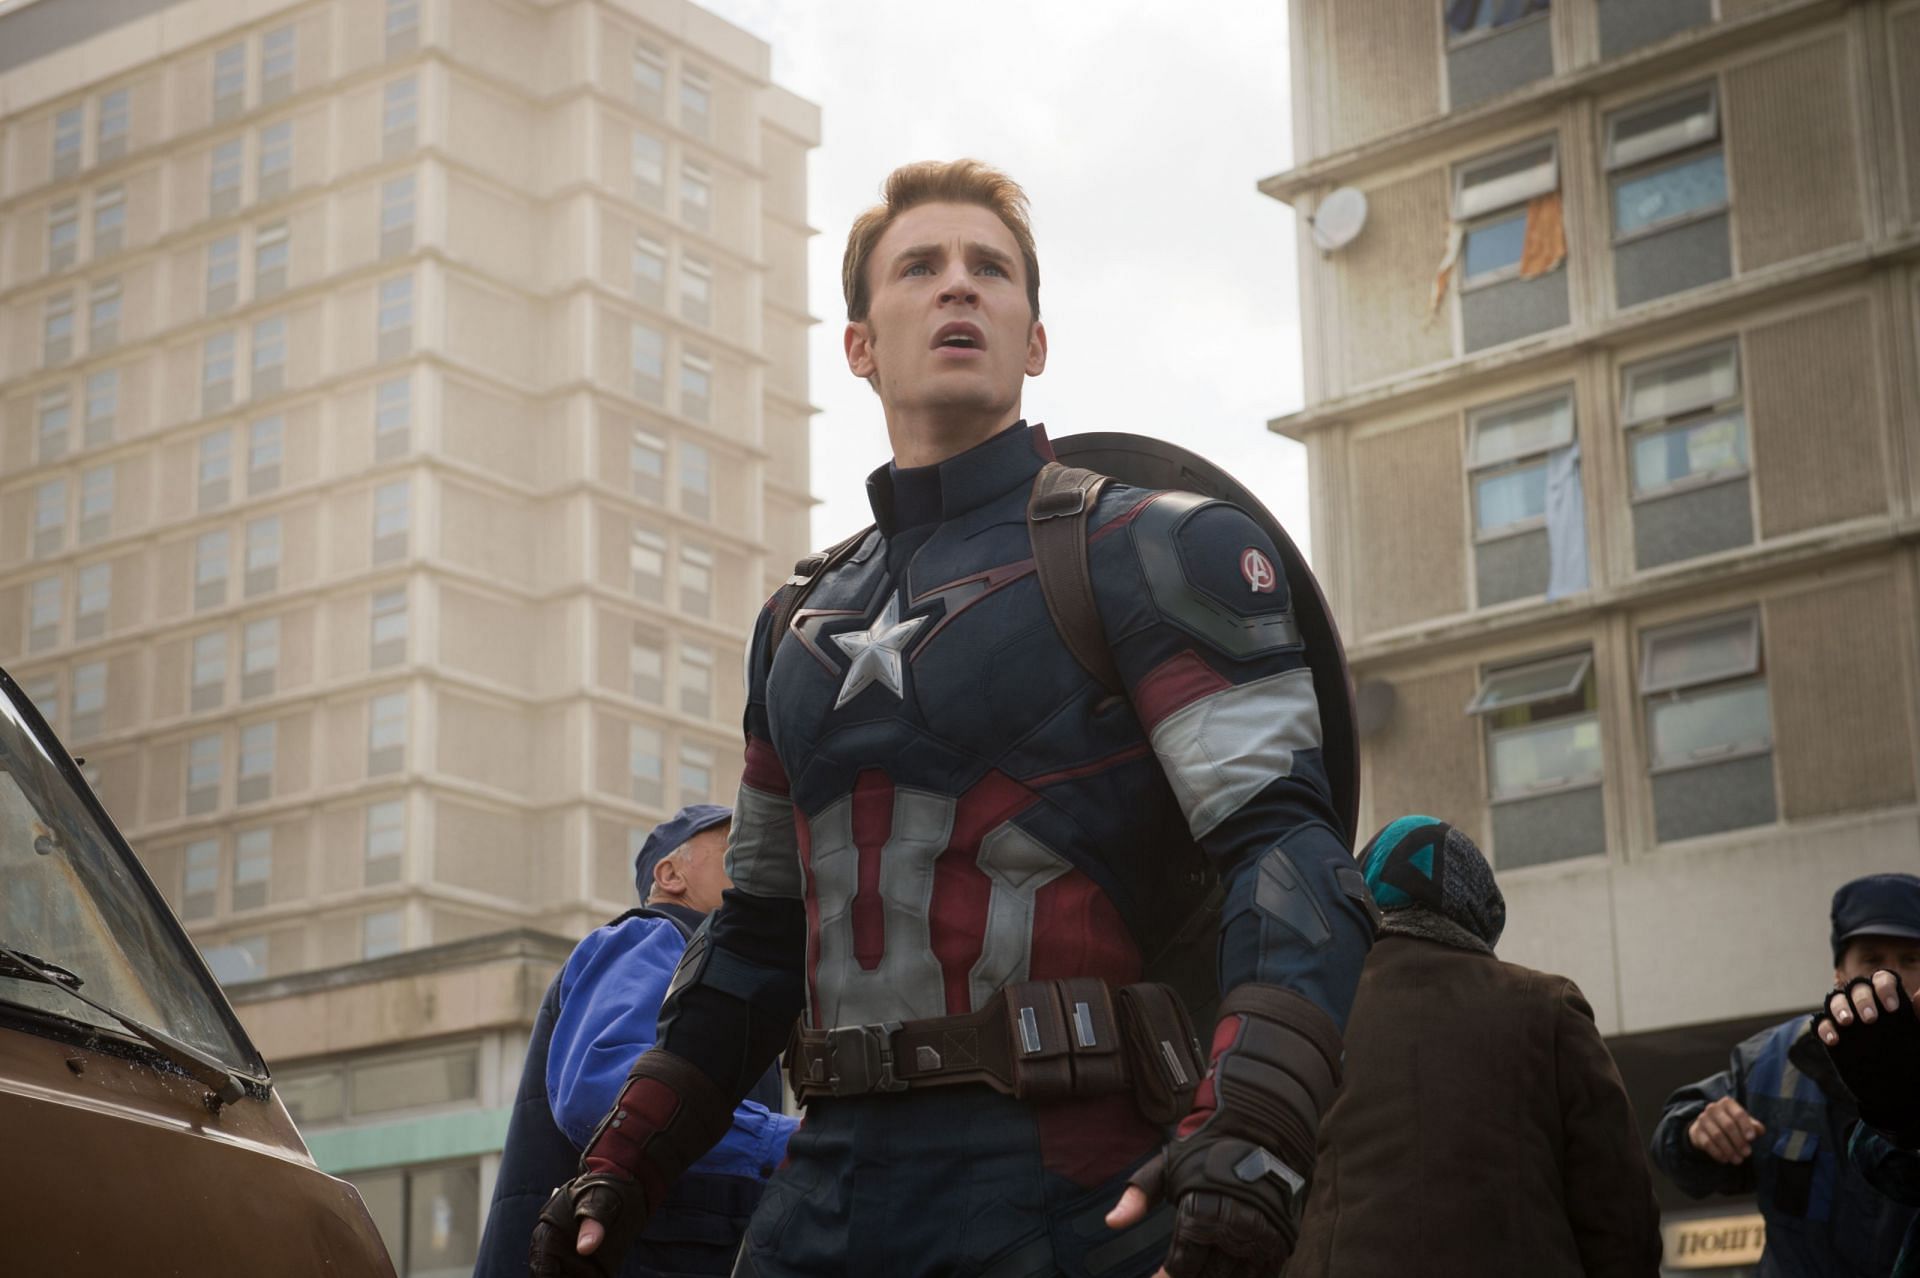 Captain America standing tall, ready to face any challenge in the MCU. (Image via Marvel Studios)